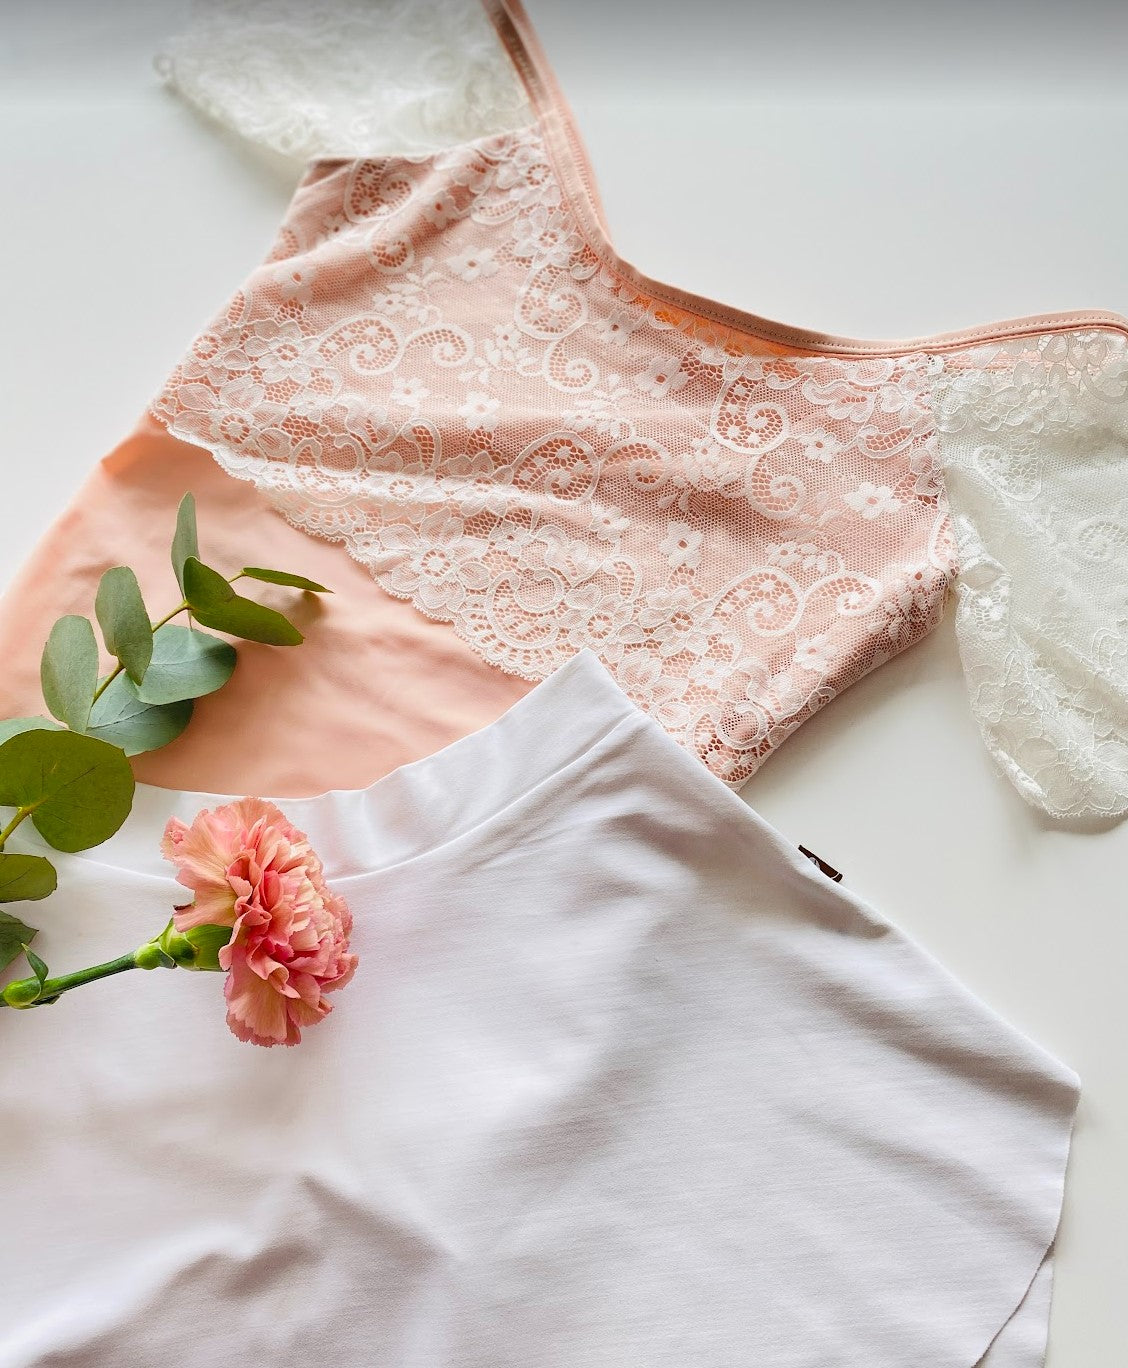 Lace Top Leotard Pastel peach from The Collective Dancewear